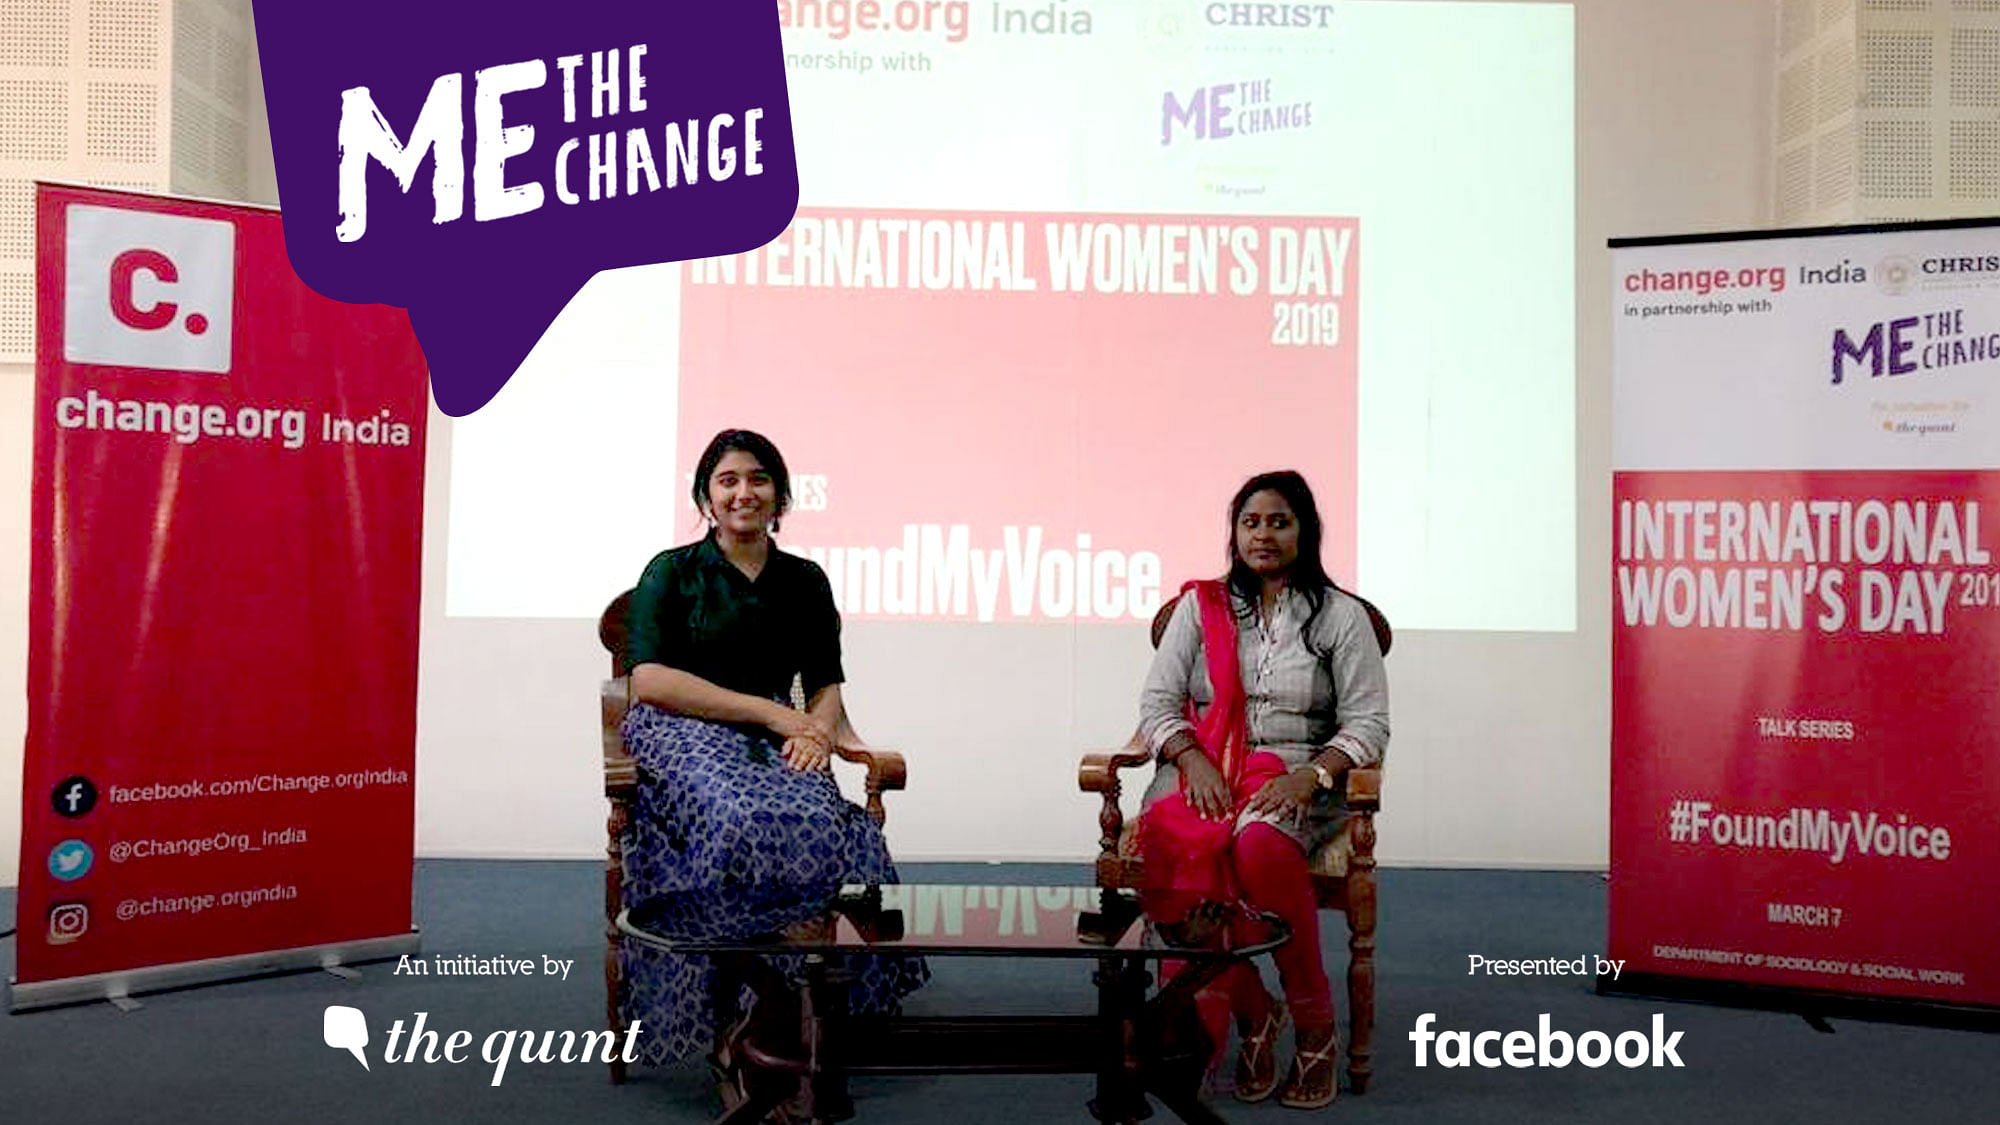 The event was part of the ‘She Creates Change’ initiative, which aims to build a community of women changemakers.